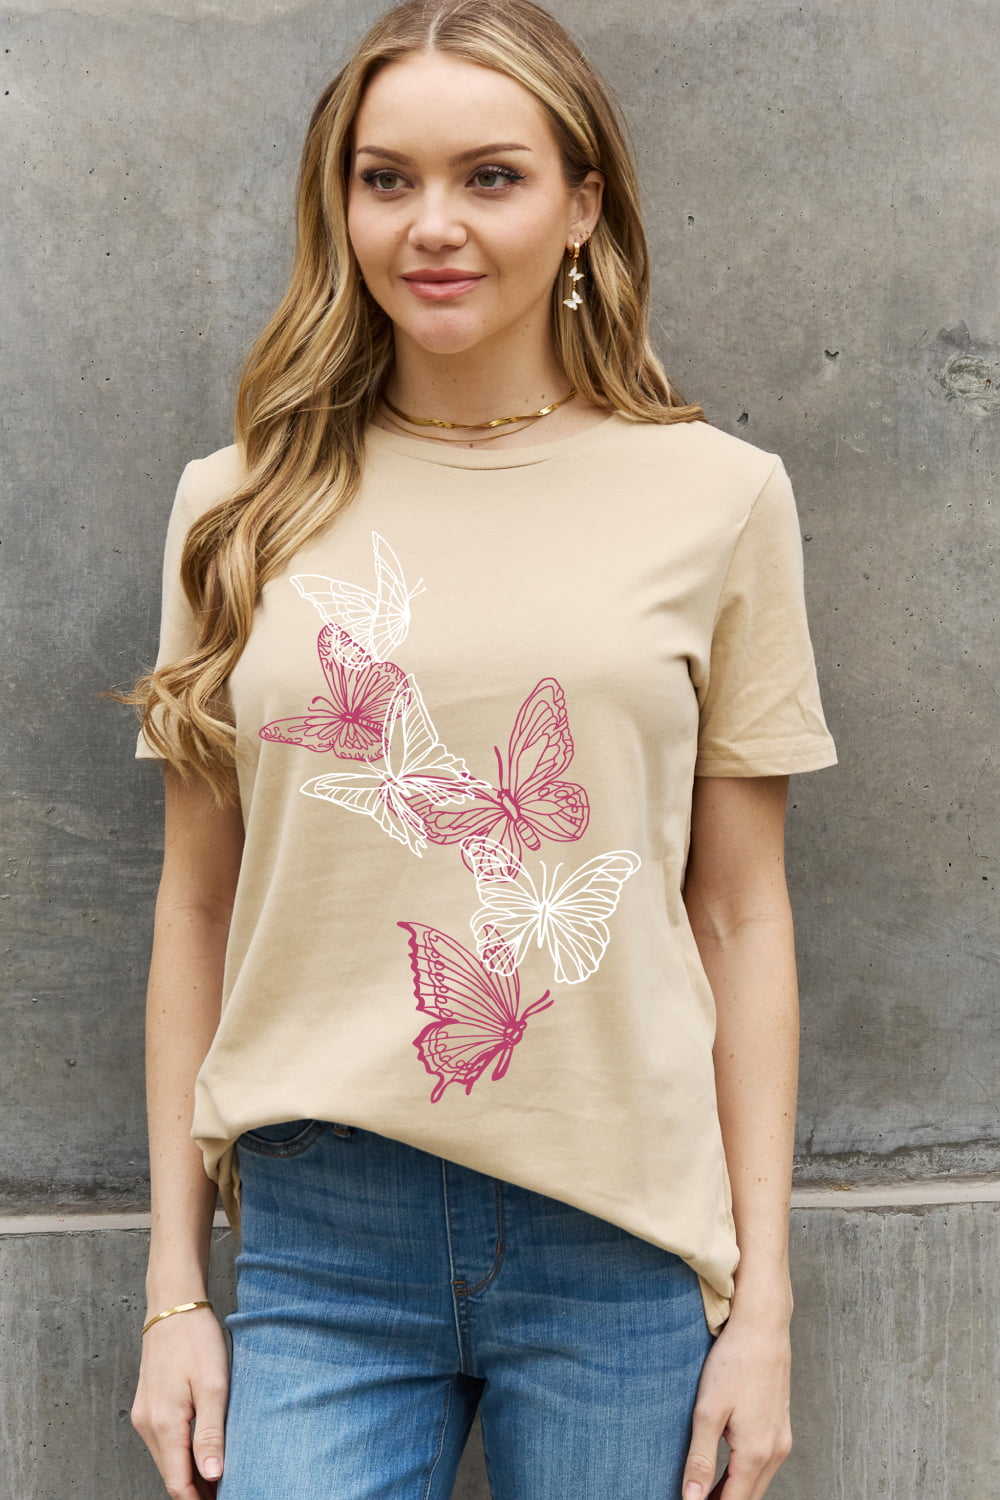 Simply Love Full Size Butterflies In Line Graphic Cotton Tee